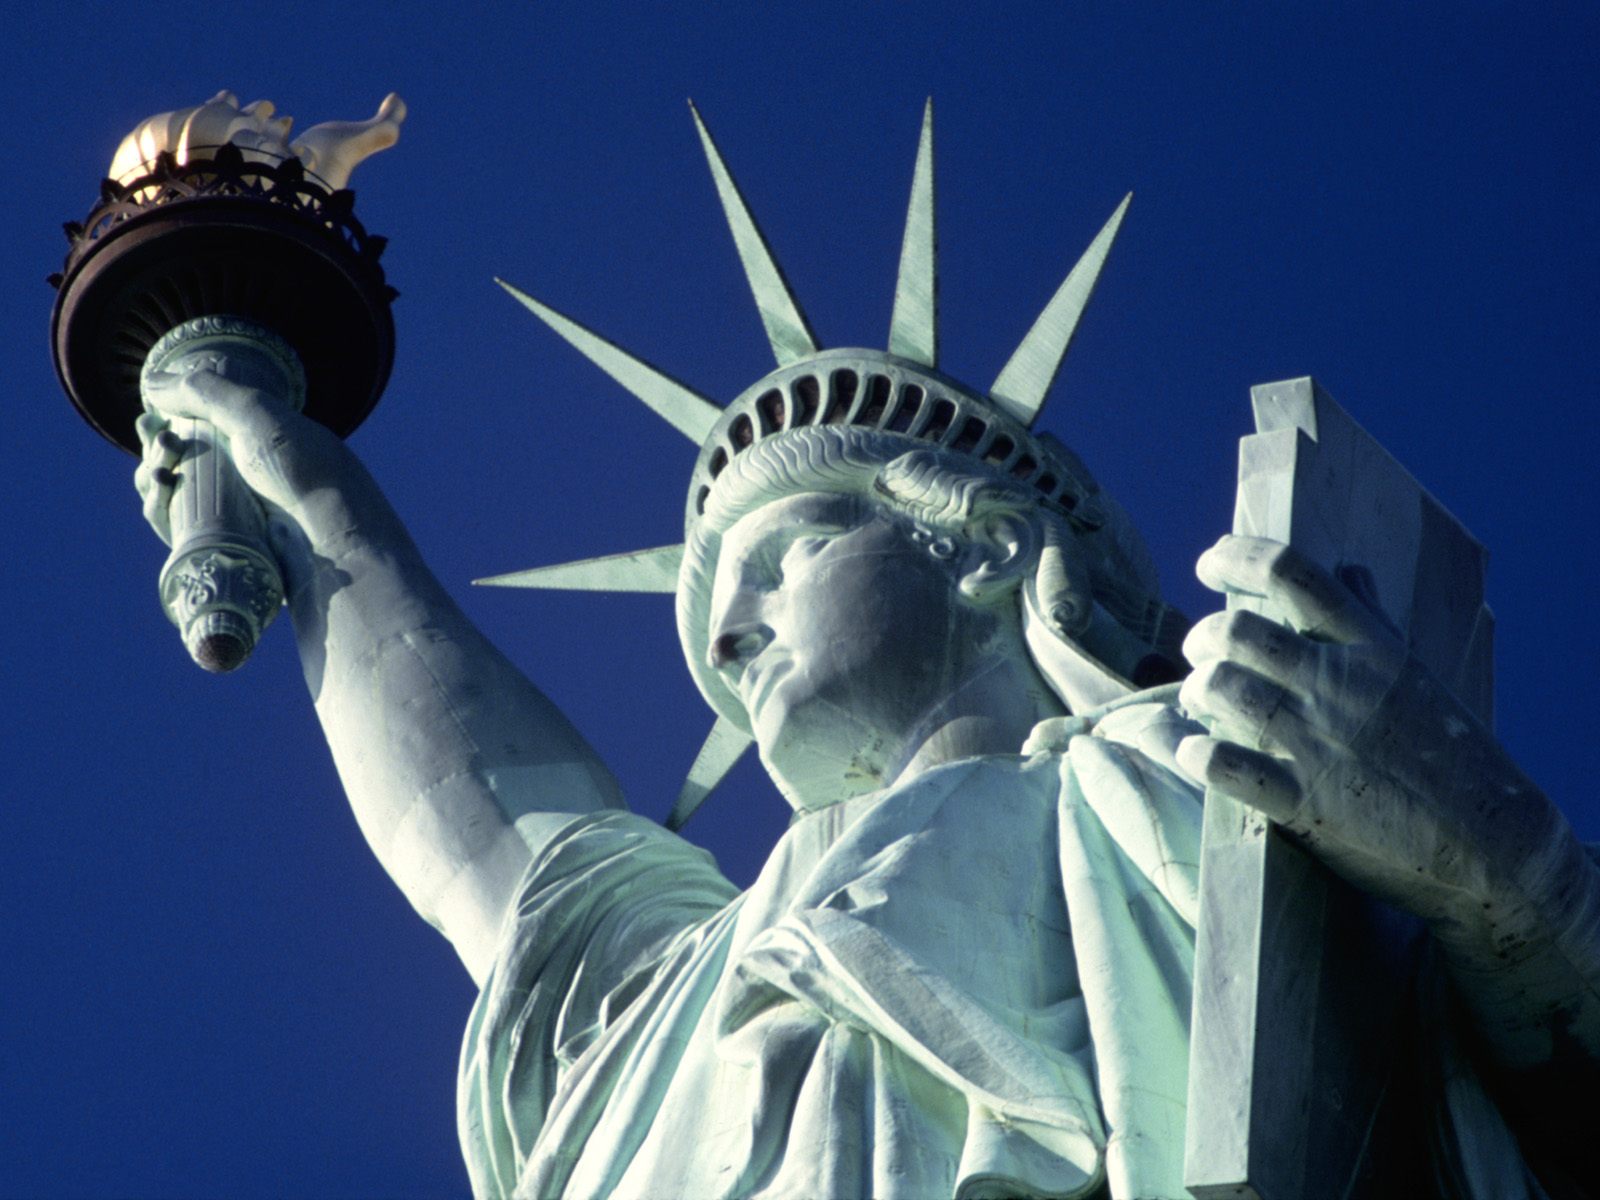 http://www.twintravelconcepts.com/wp-content/uploads/2013/02/statue-of-liberty.jpg